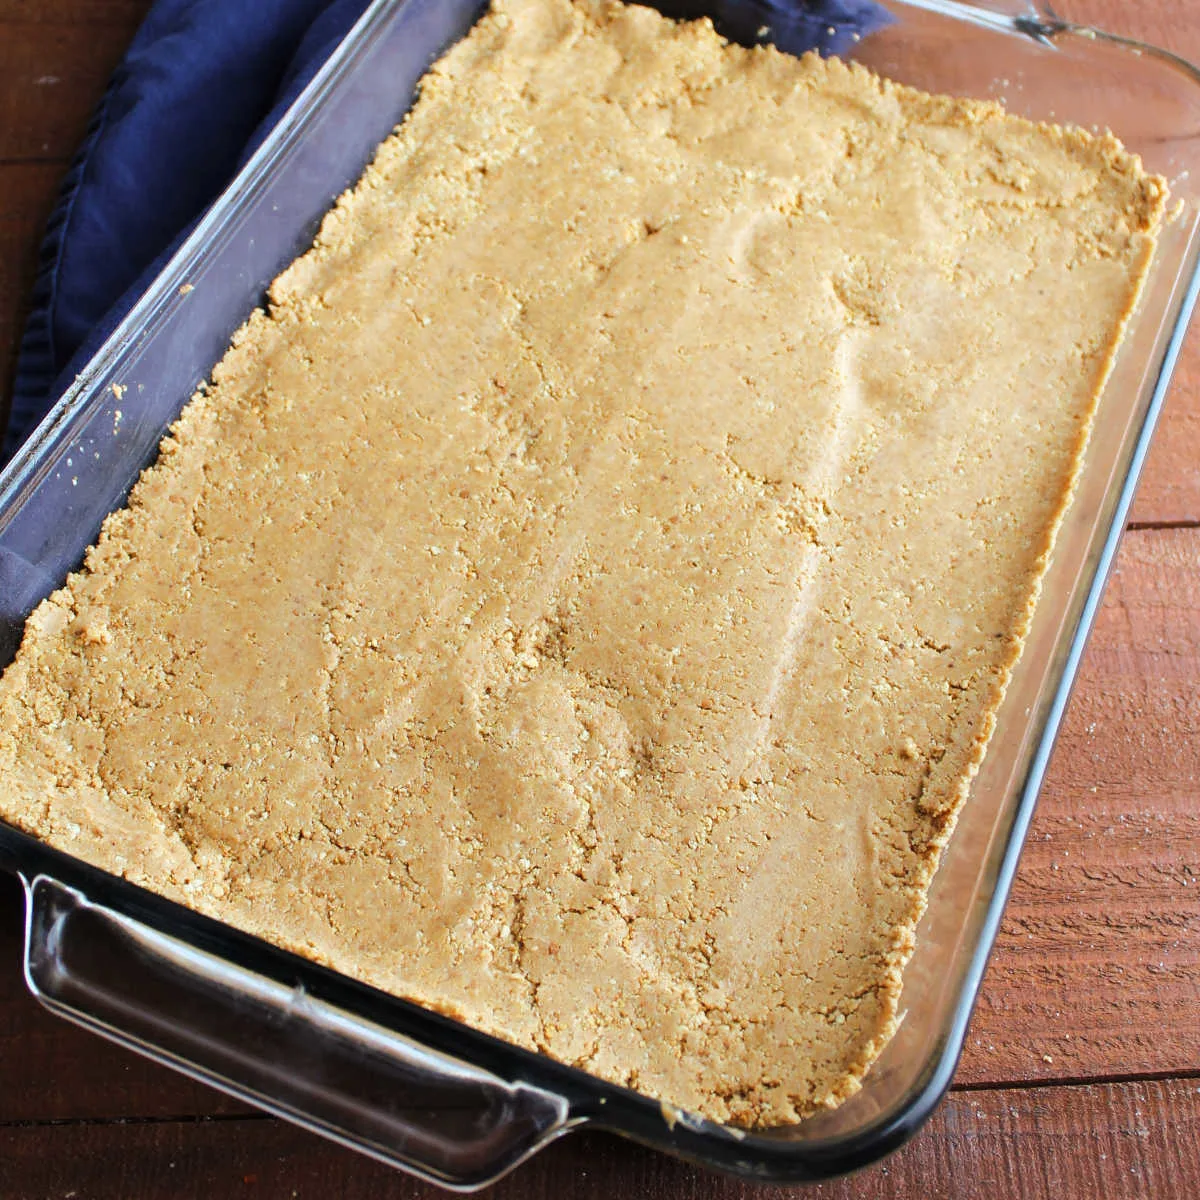 Peanut butter mixture pressed into pan.